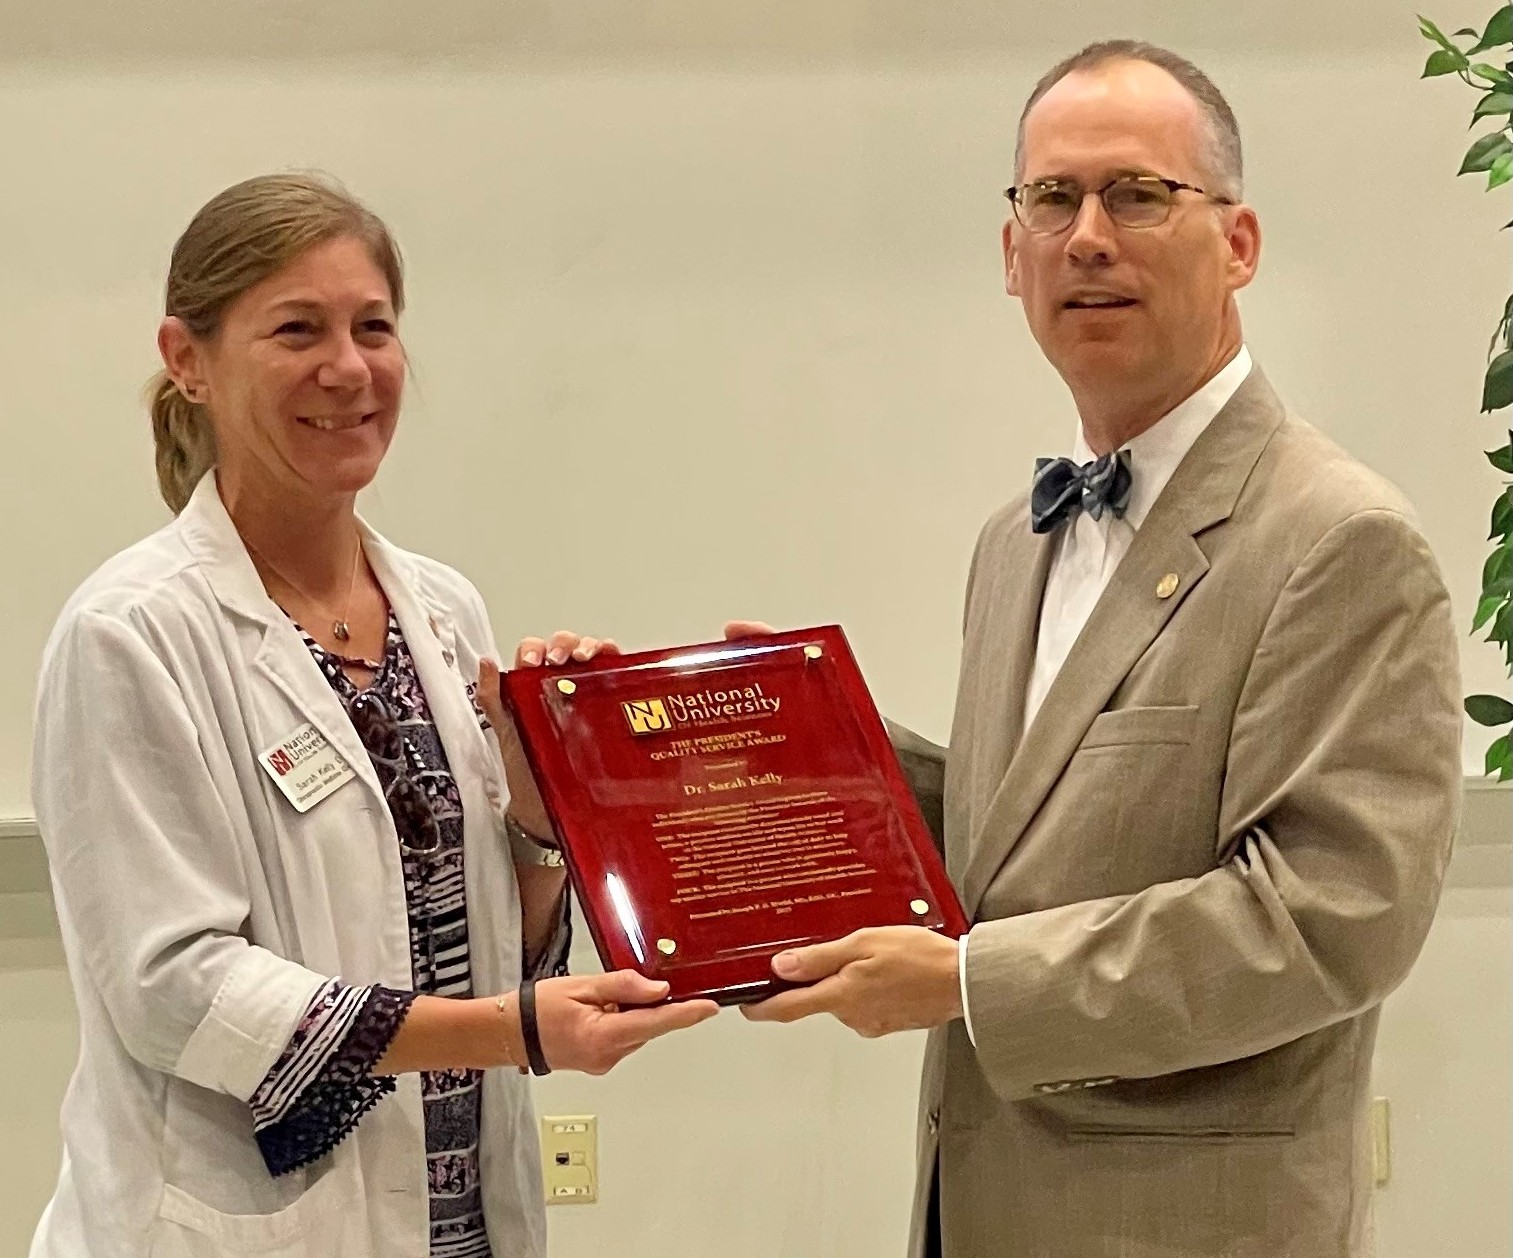 President Joseph P.D. Stiefel, MS, EdD, DC, presents Sarah Kelly, DC ’99, MSACP ’21, Assistant Professor of Clinical Sciences at NUHS-Florida, with the President’s Quality Service Award. 